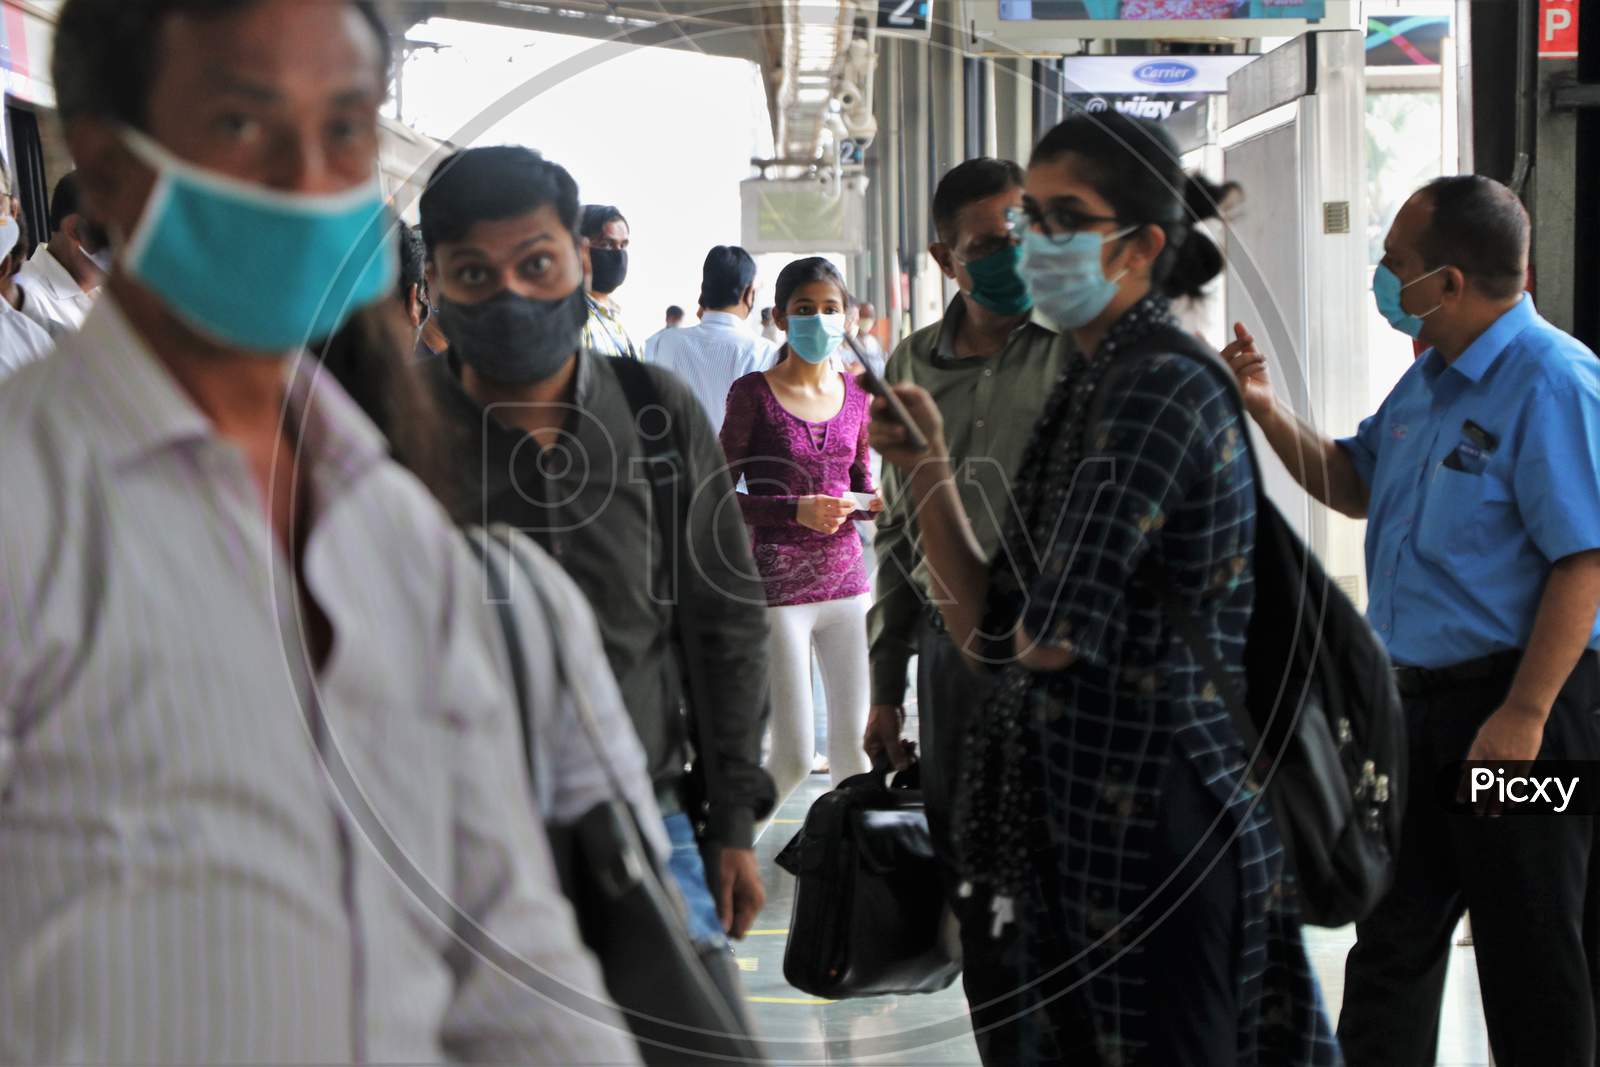 Commuters are seen on a platform, after authorities resumed the metro services, amidst the coronavirus disease (COVID-19) outbreak, in Mumbai, India, October 28, 2020.